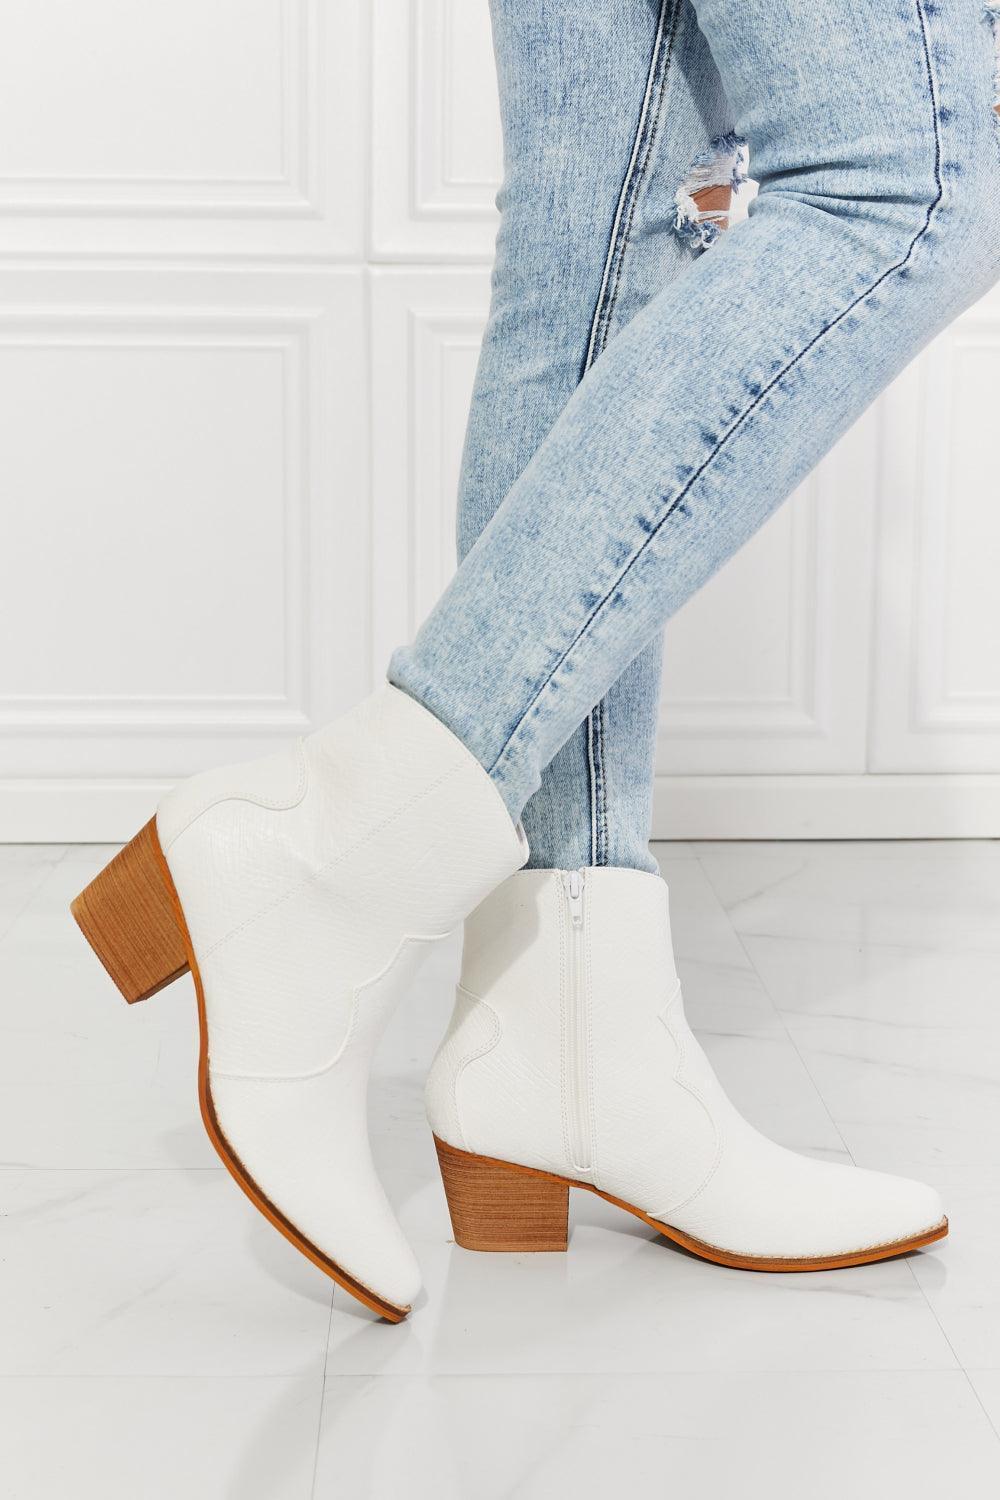 MMShoes Faux Leather White Western Ankle Boots - MXSTUDIO.COM